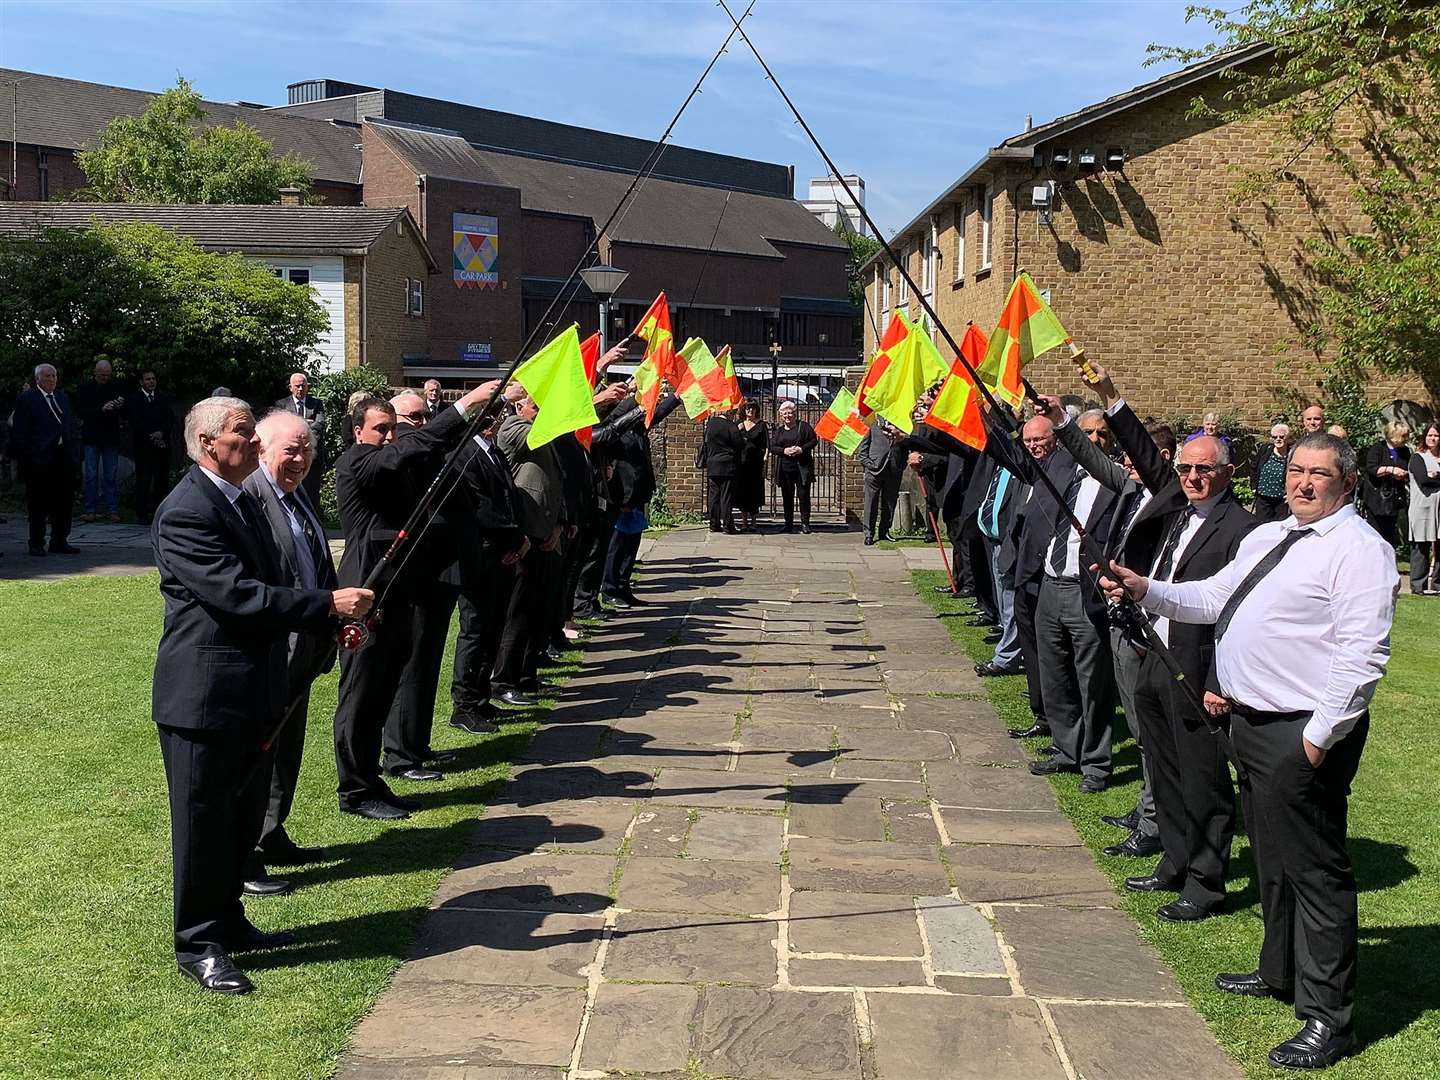 Referees and fishermen held a guard of honour for the funeral of Graham East (10522021)